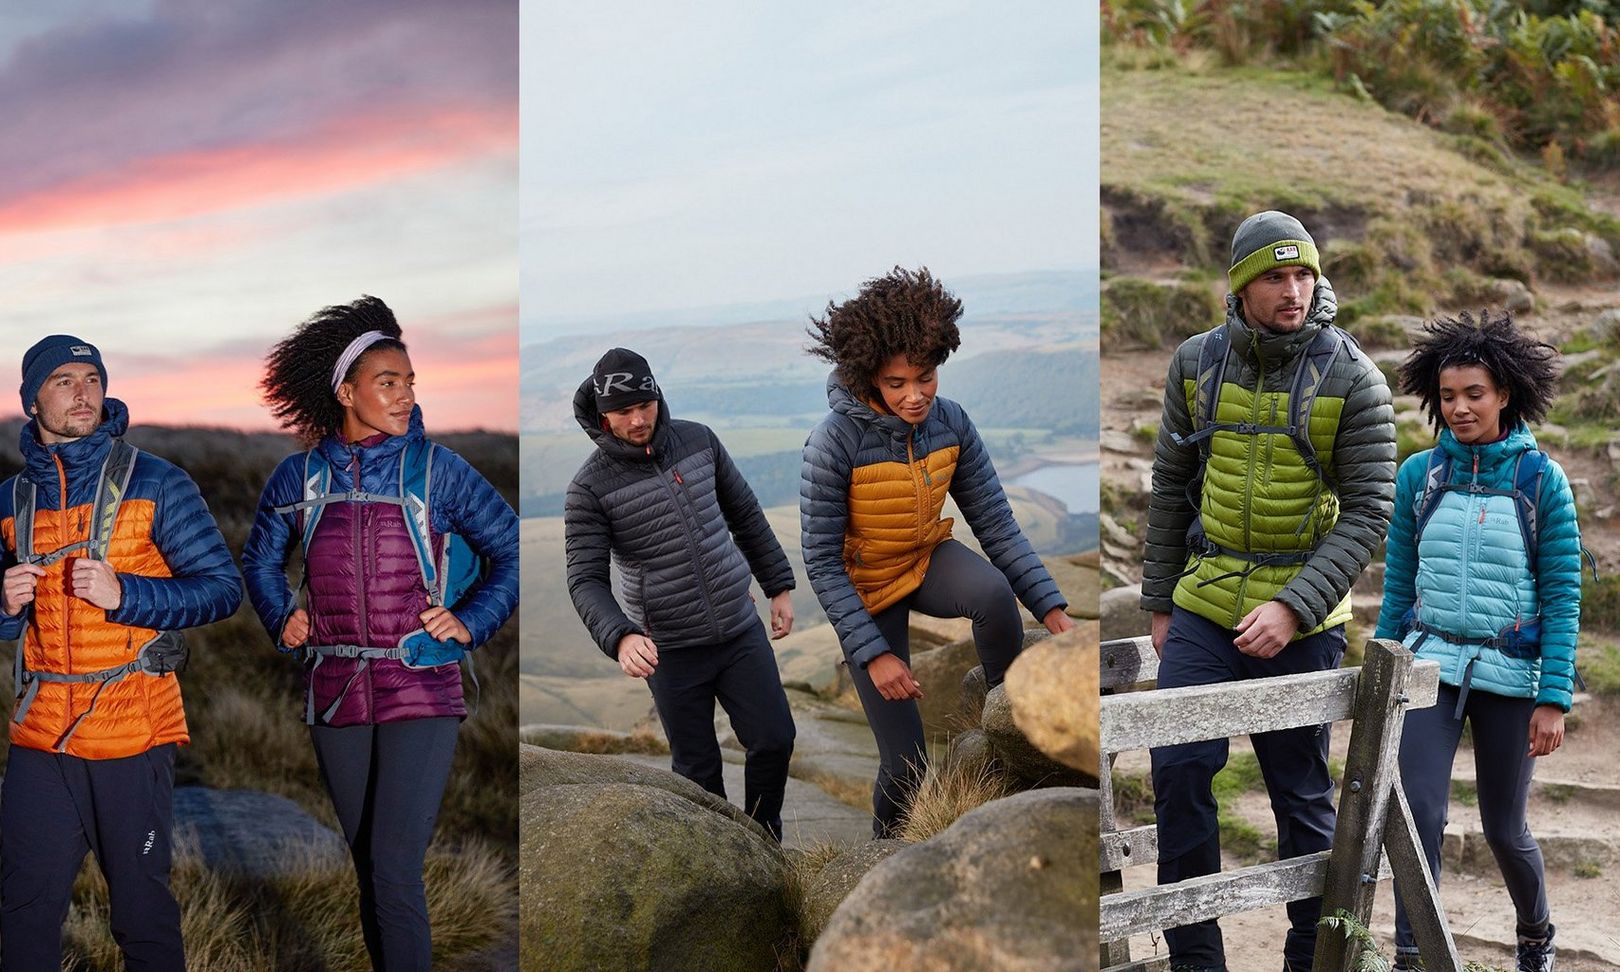 A first look at Rab's Limited Edition Microlight Alpine jackets taken in the Peak District, UK